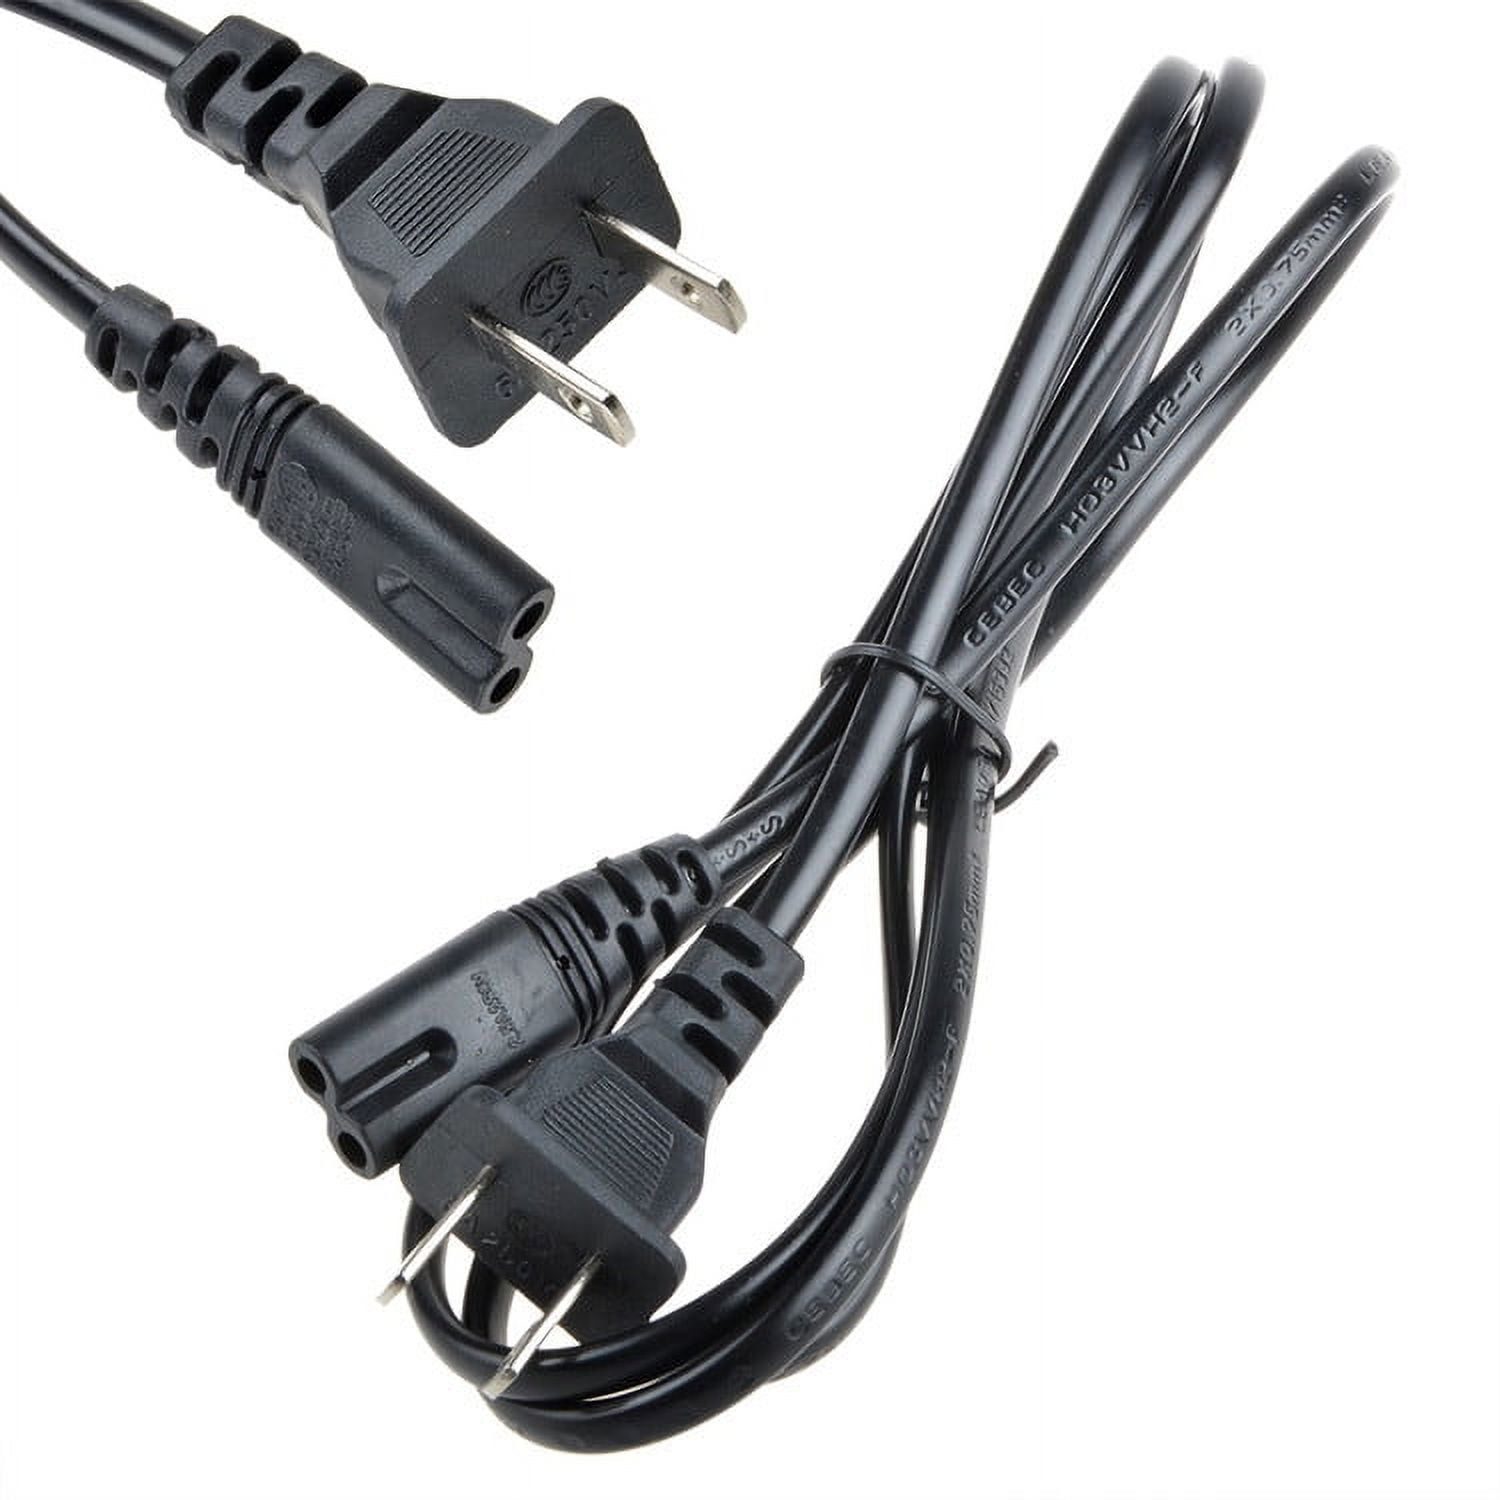 Harness Plug, Audio Cable Adaptor 150cm/59in Length 5.0 DC12V With  Microphone For Car Replacement For RCD 300 